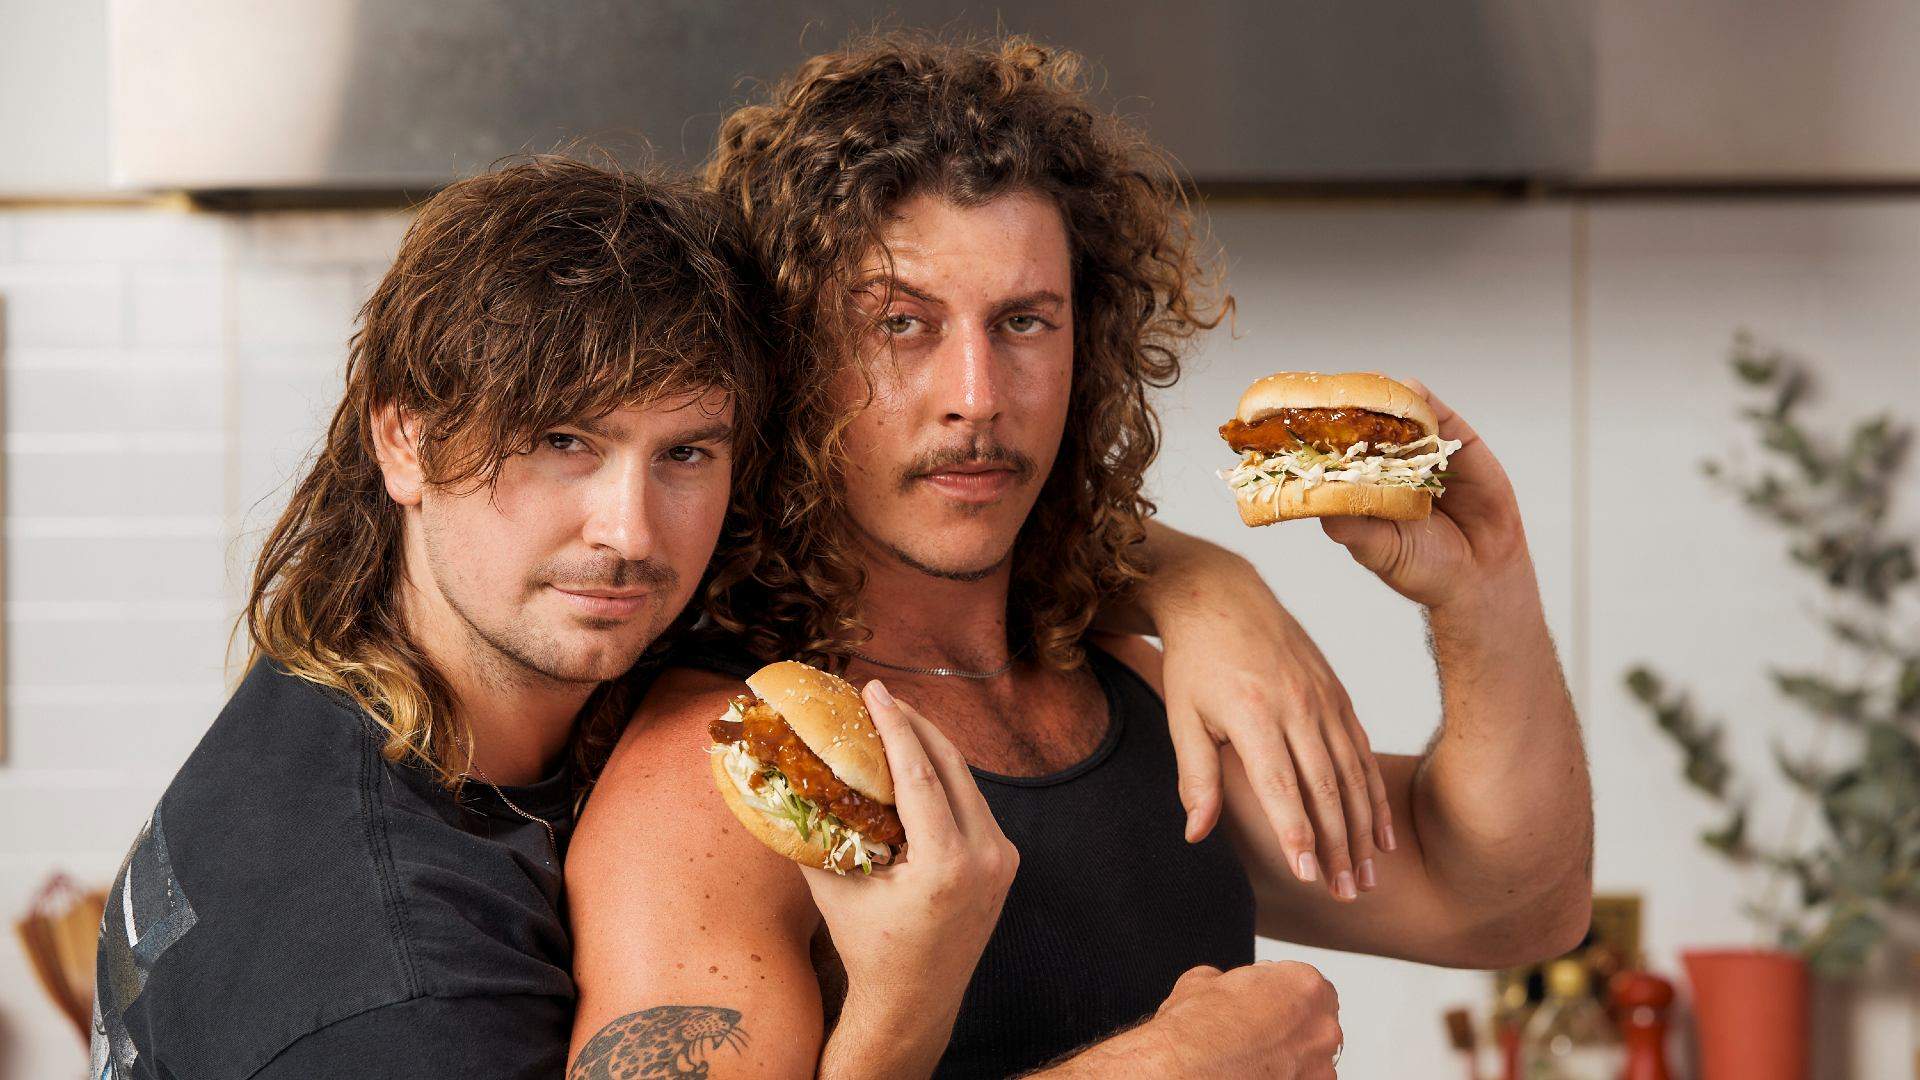 KFC Has Created a Peking Cluk Burger and It's Throwing a Festival on Cockatoo Island with Peking Duk to Celebrate